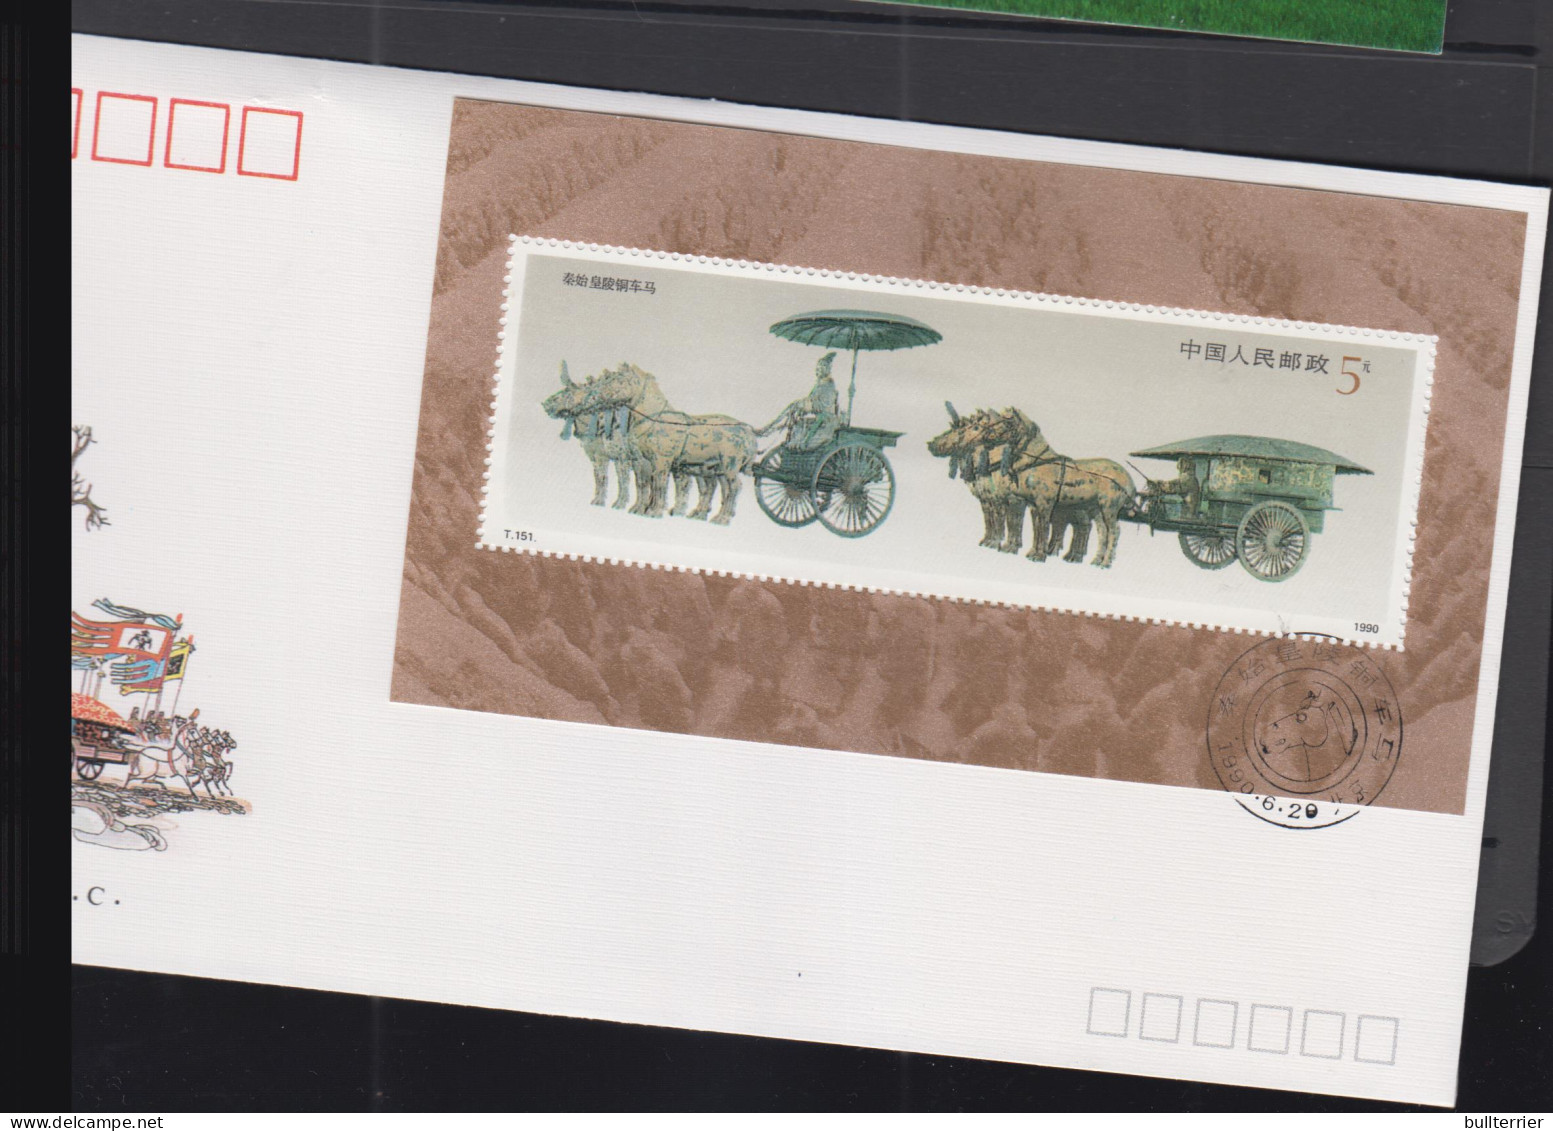 CHINA - 21990 - BRONZE CHARIOT SOUVENIR SHEET ON  ILLUSTRATED FDC  - Briefe U. Dokumente